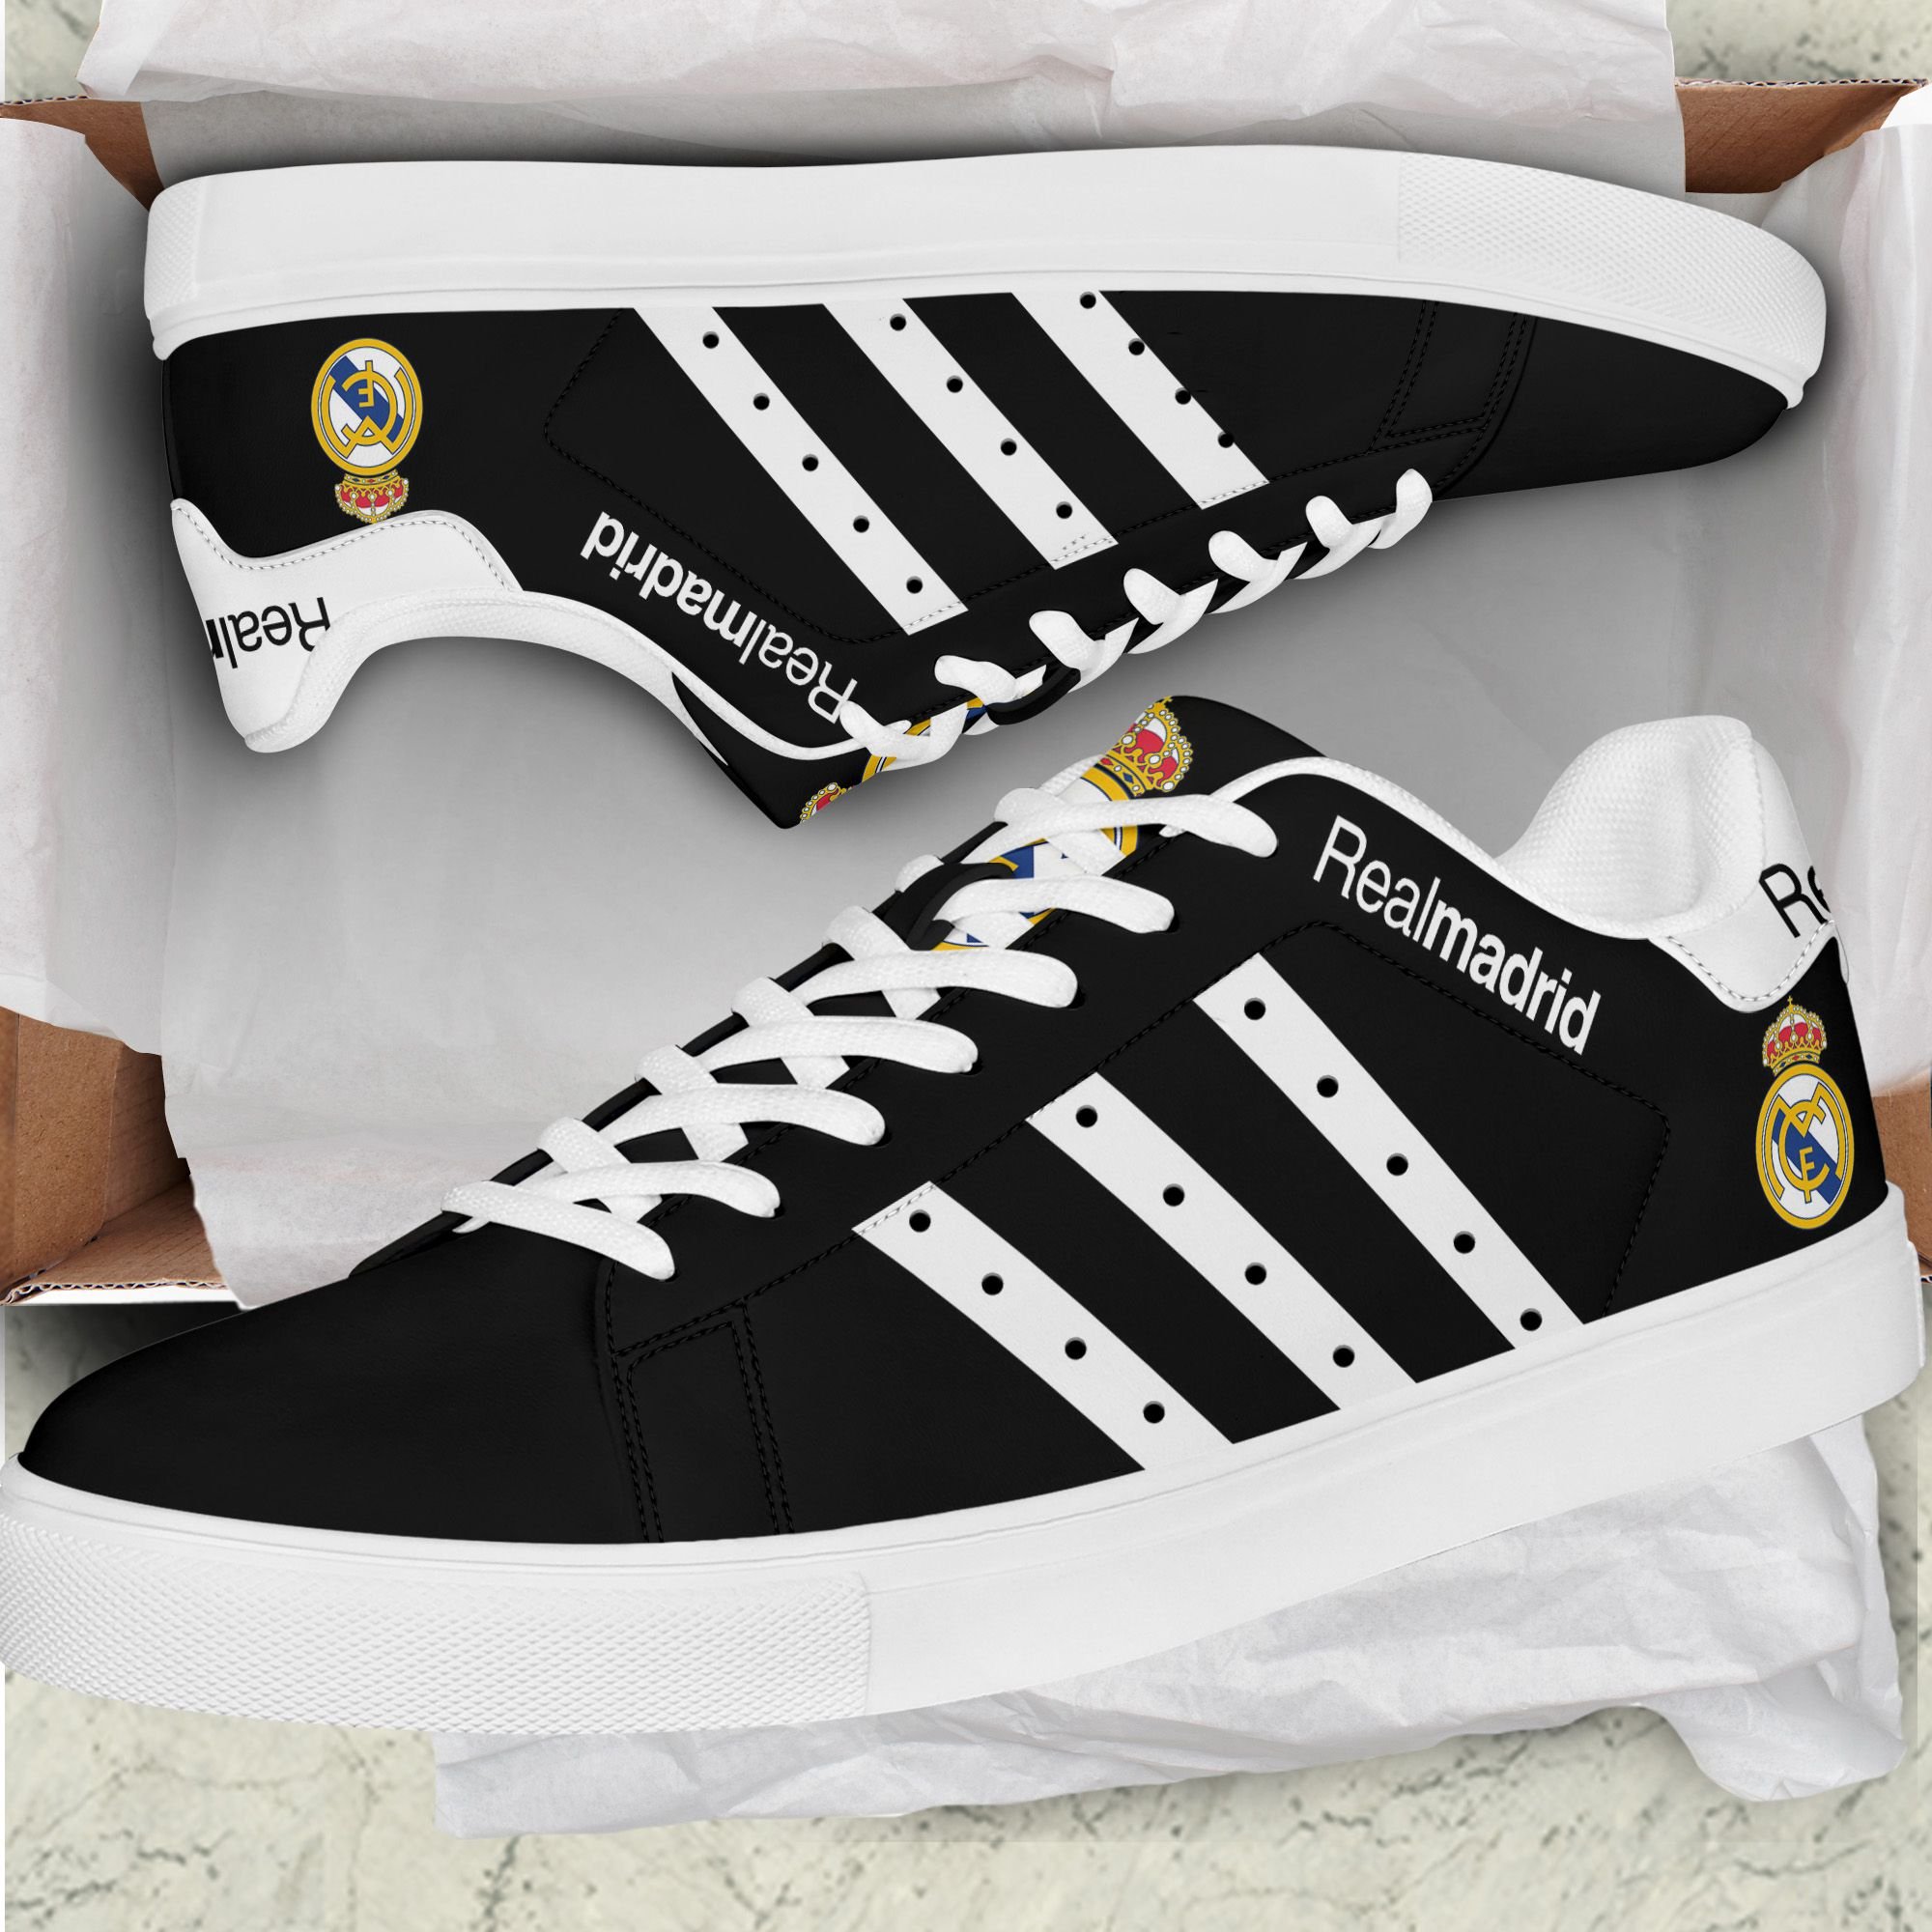 Real Madrid stan smith shoes - Picture 1